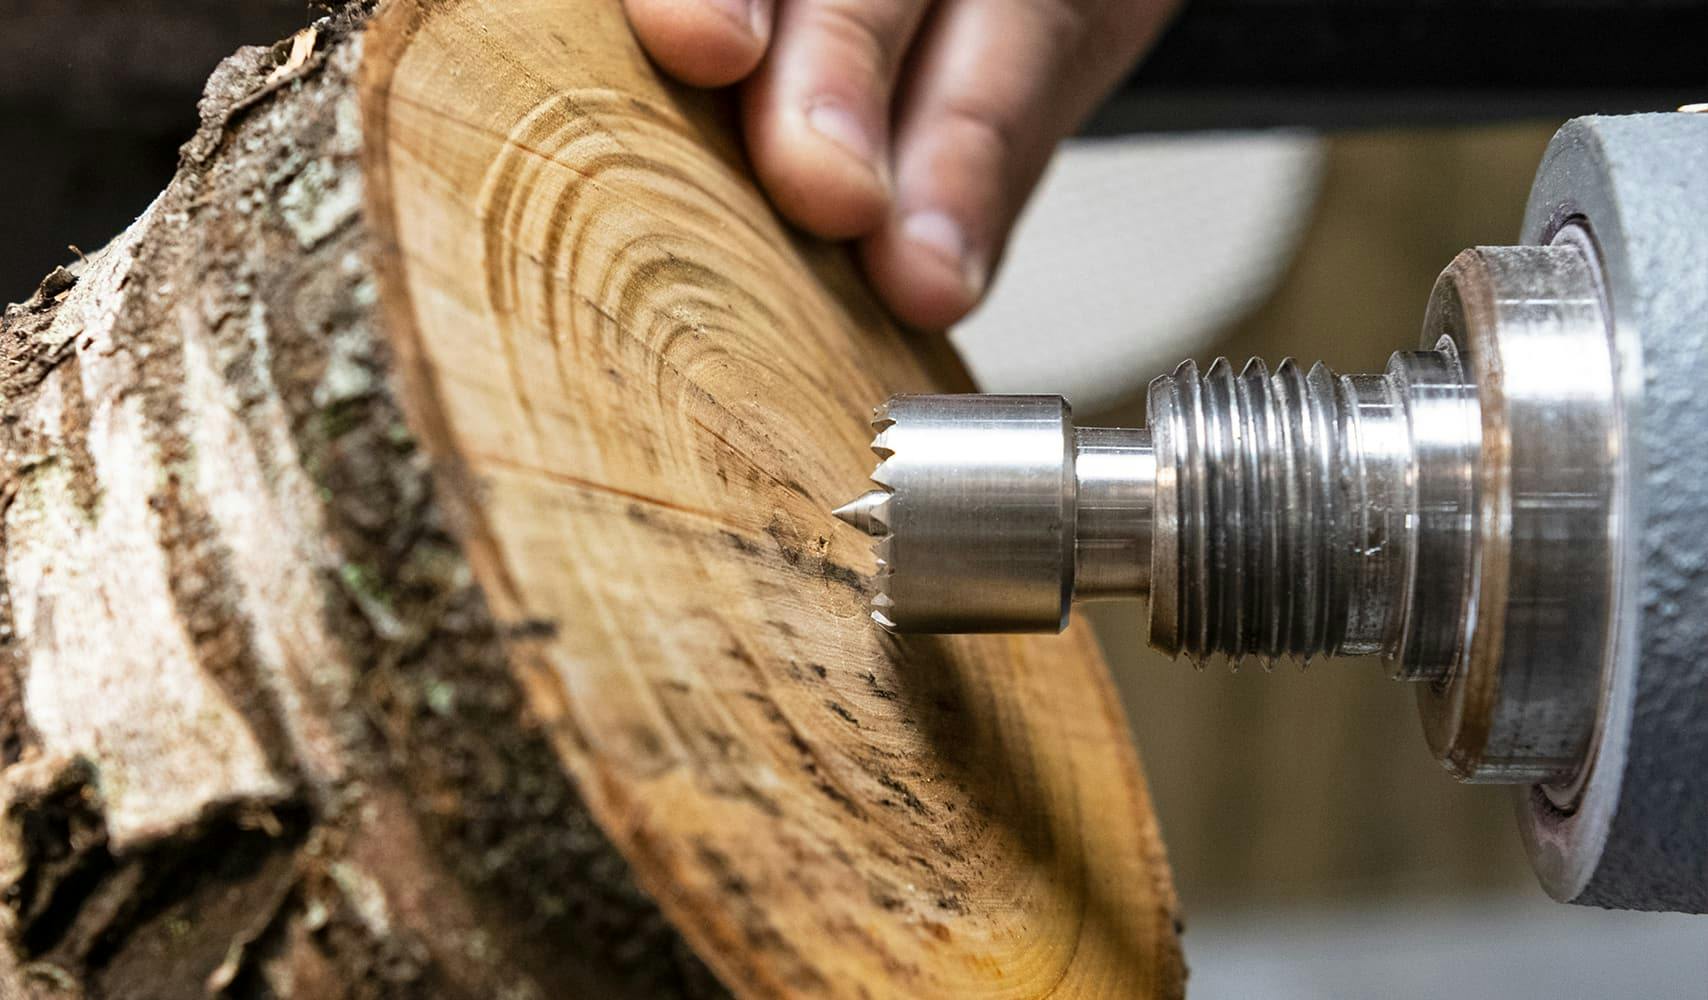 Axminster Woodturning Pro Drive offers